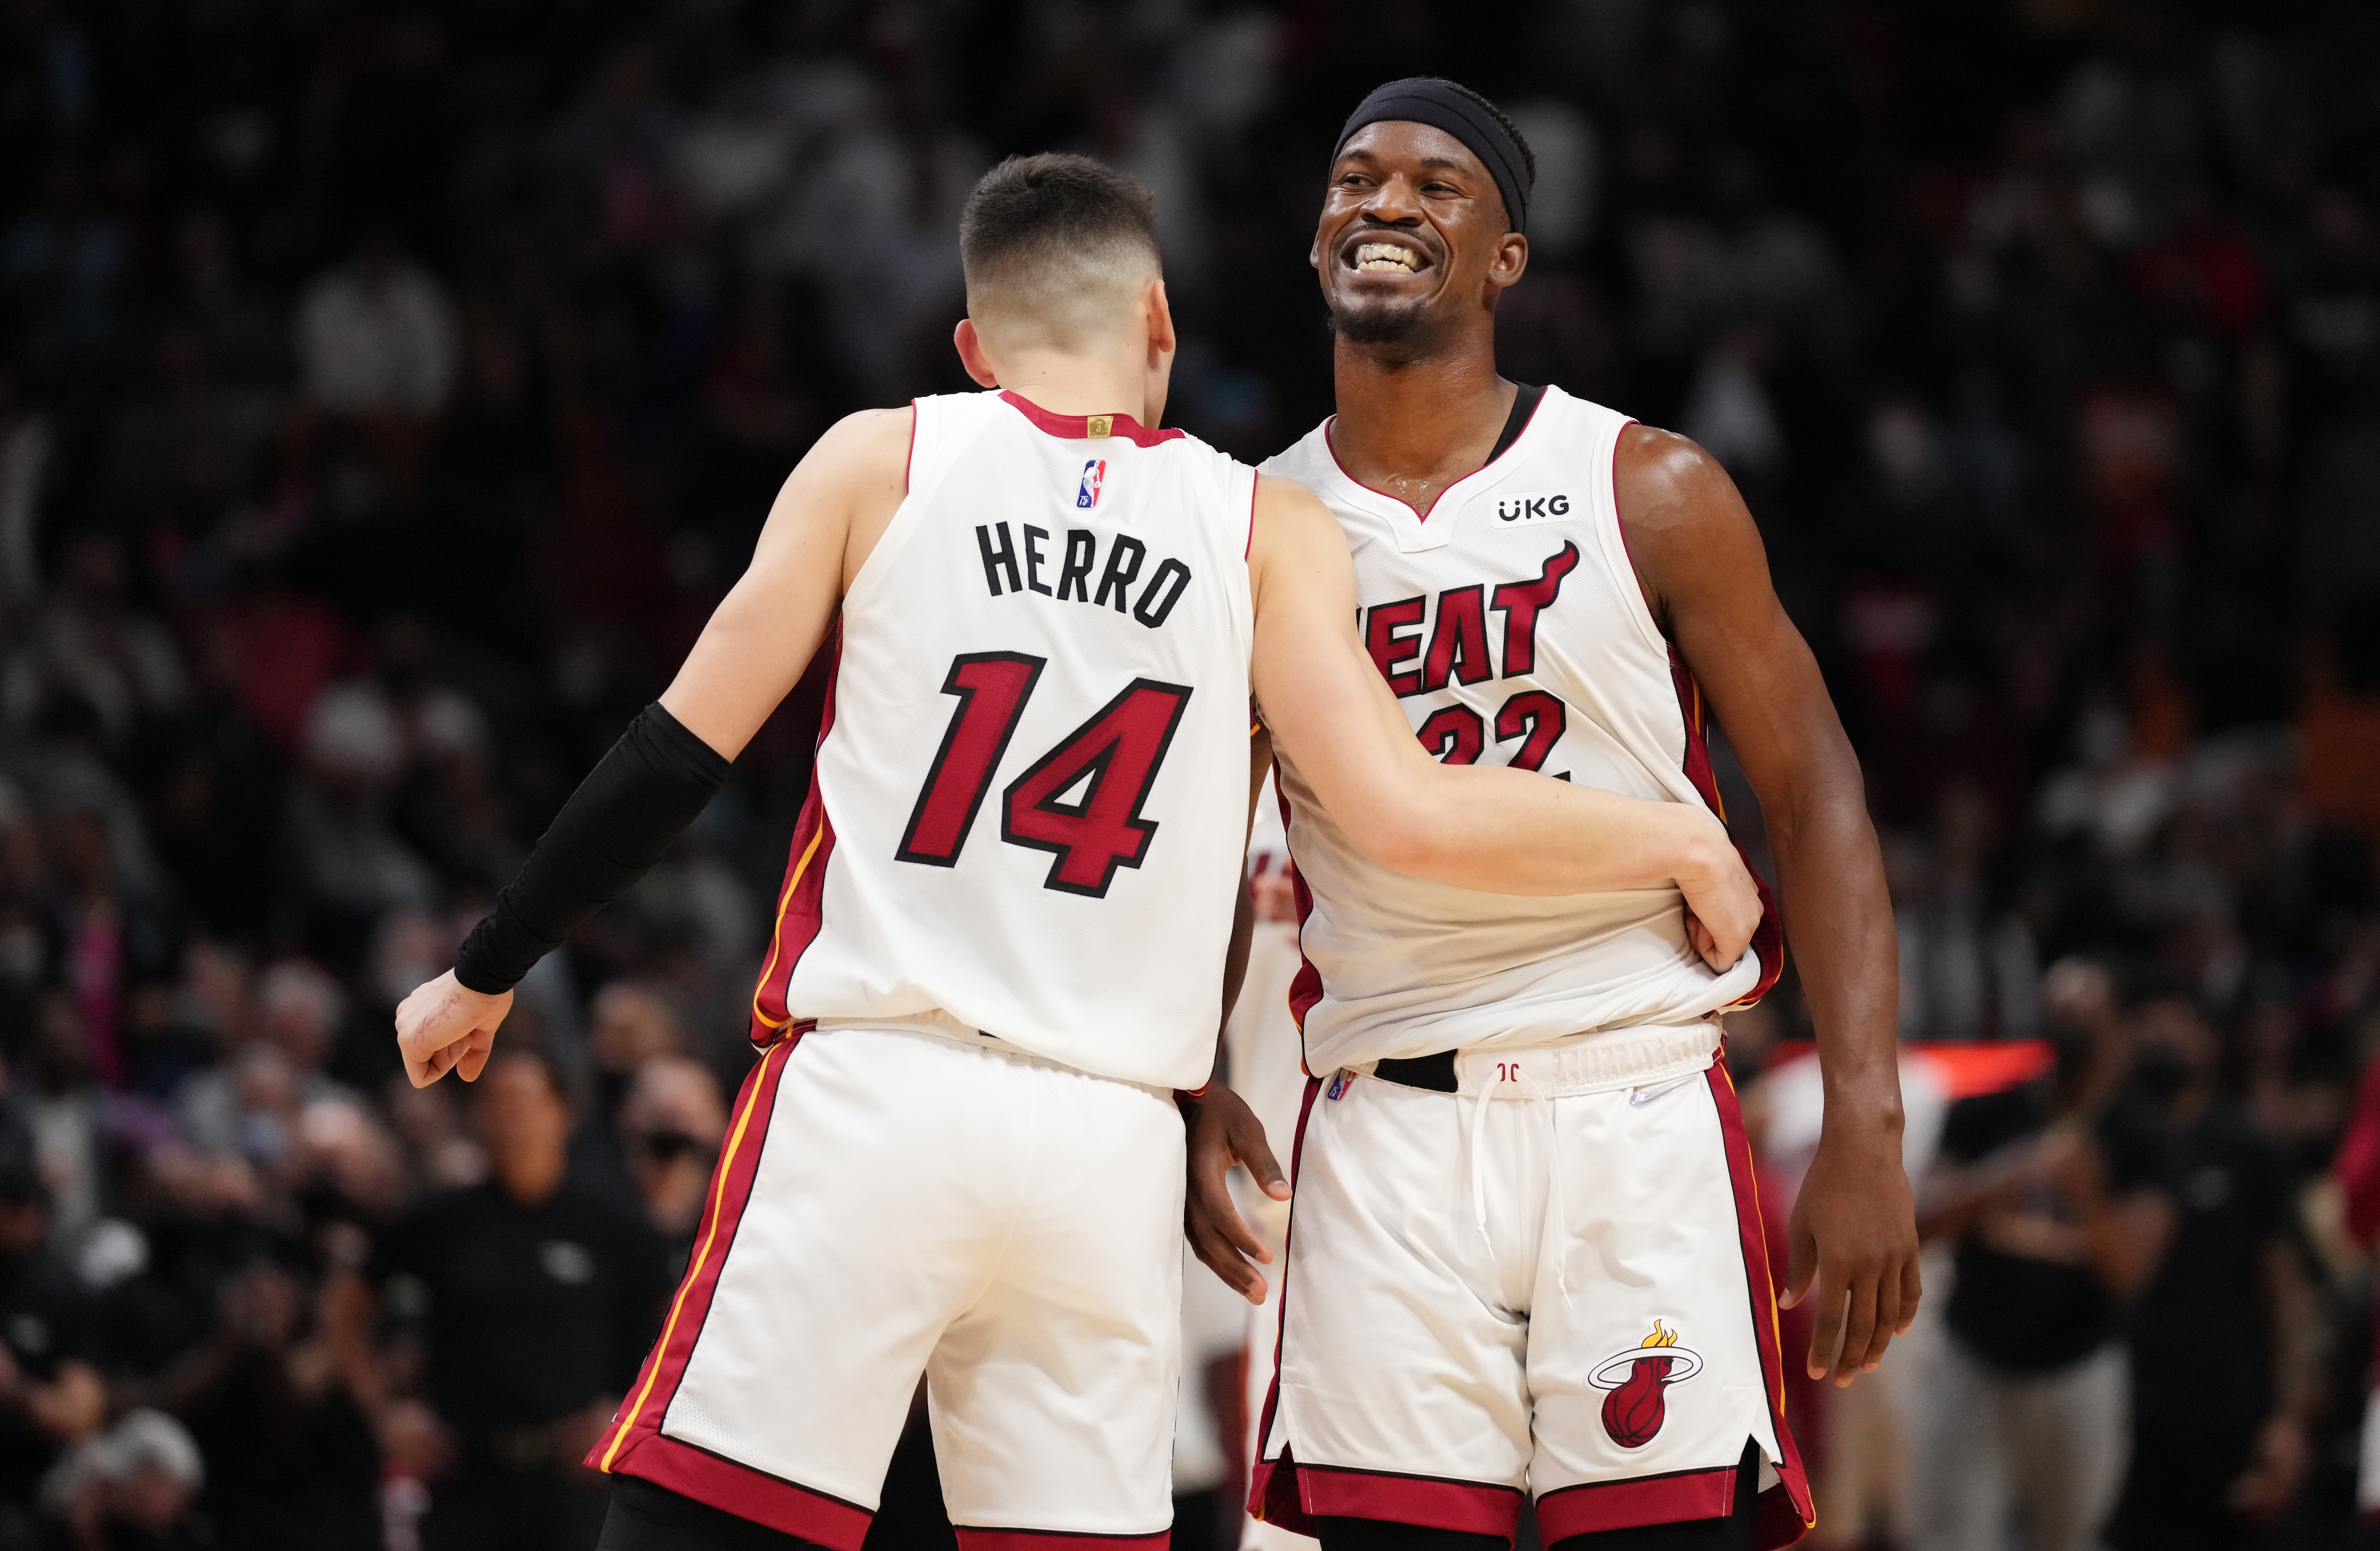 Heat overcome Butler's absence in 115-109 win over Portland